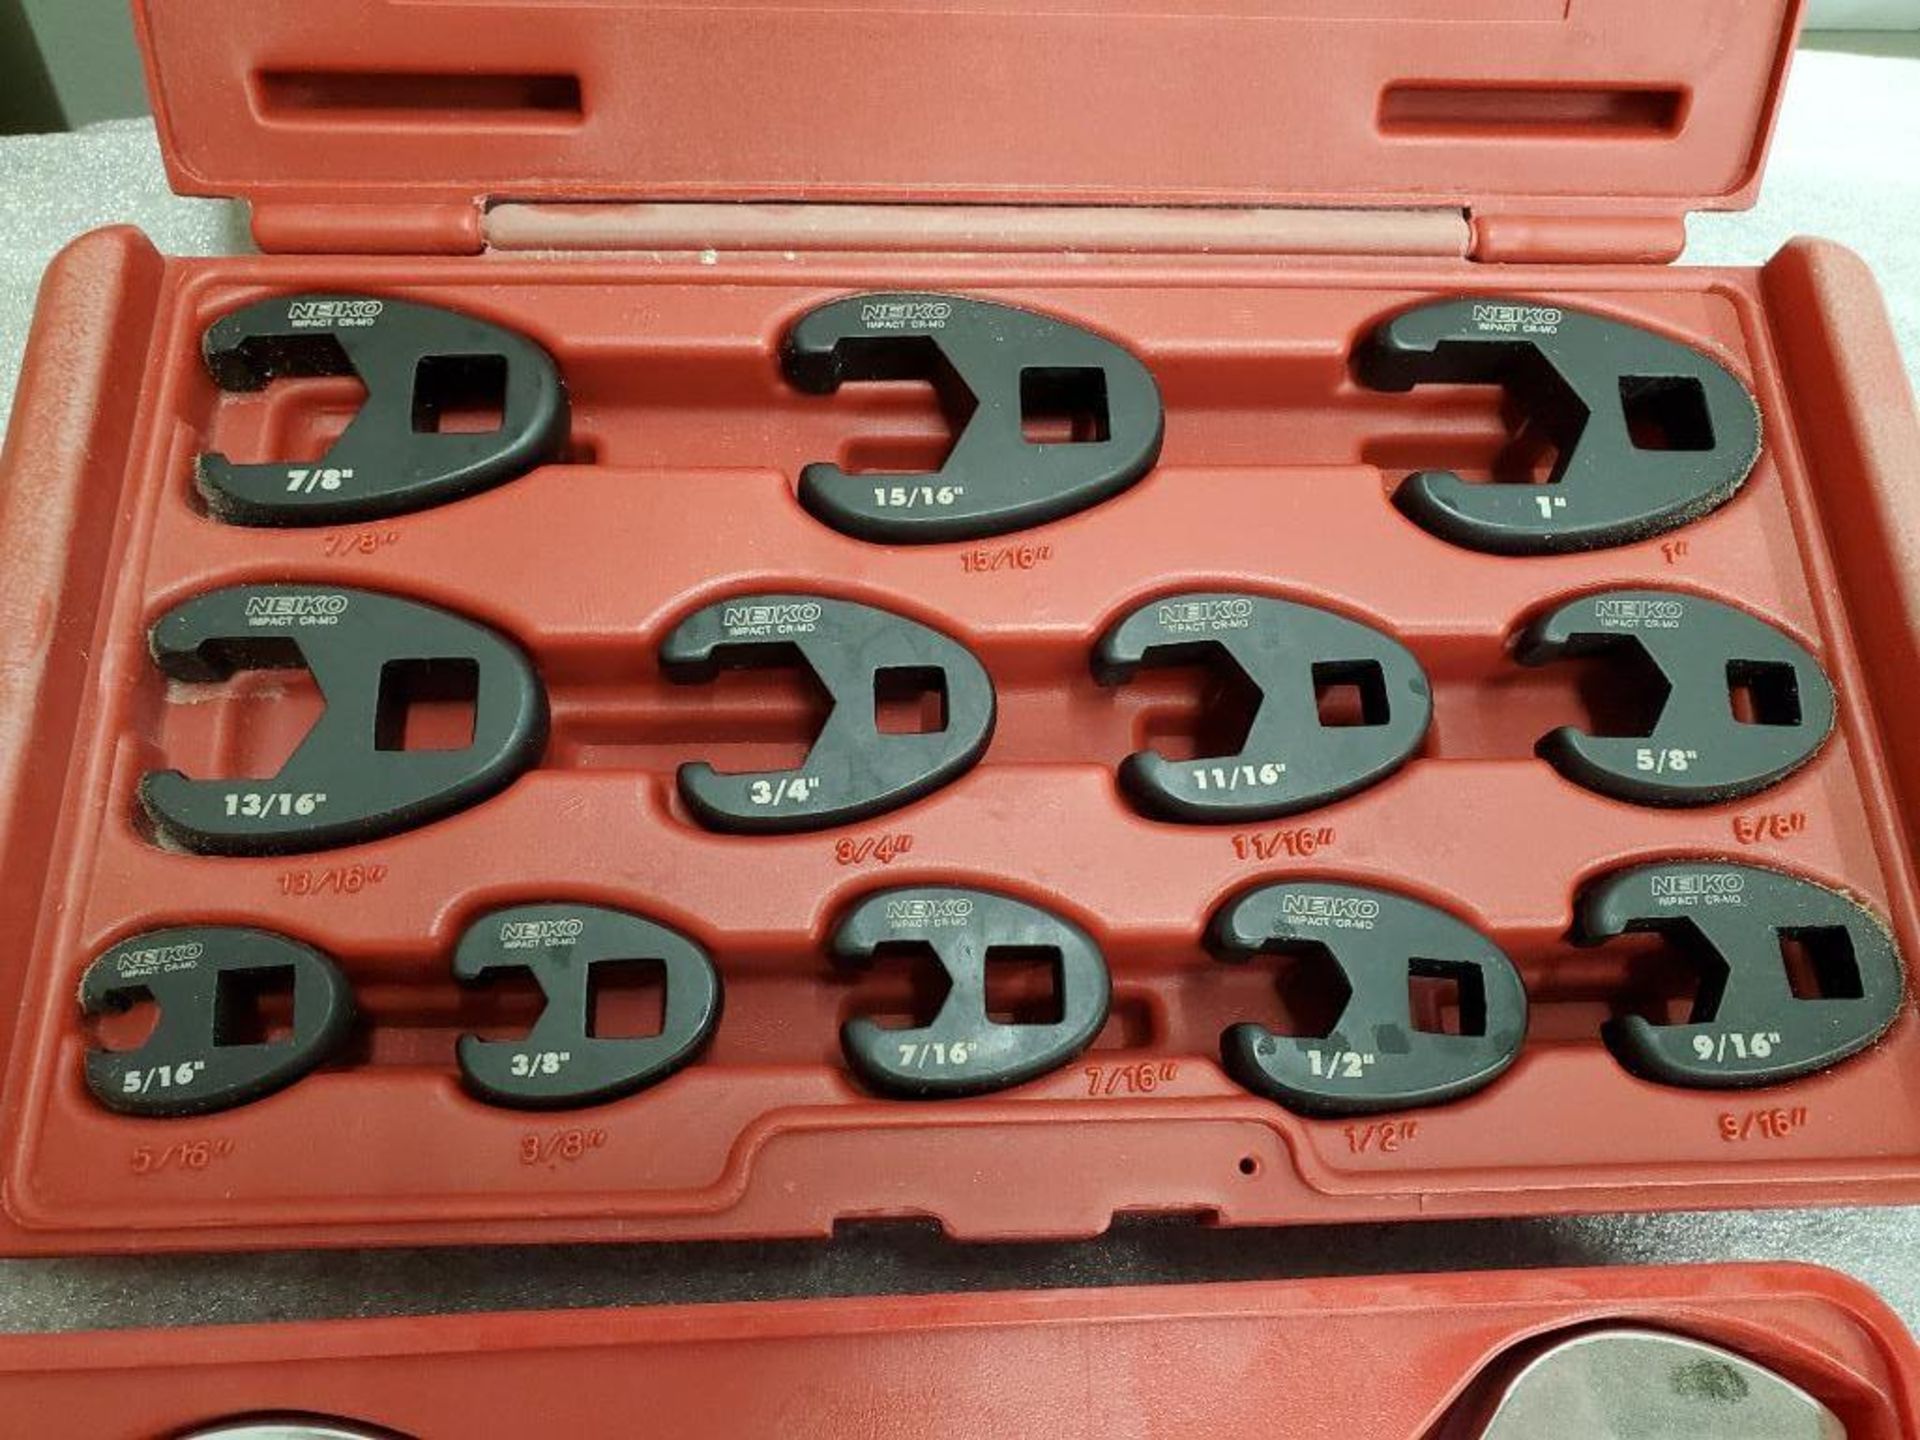 Neiko 12-Pc. Crowfeet Wrench Set, (33) Sunex & Assorted Crowfeet Wrenches, Up to 2", Standard & Metr - Image 4 of 5